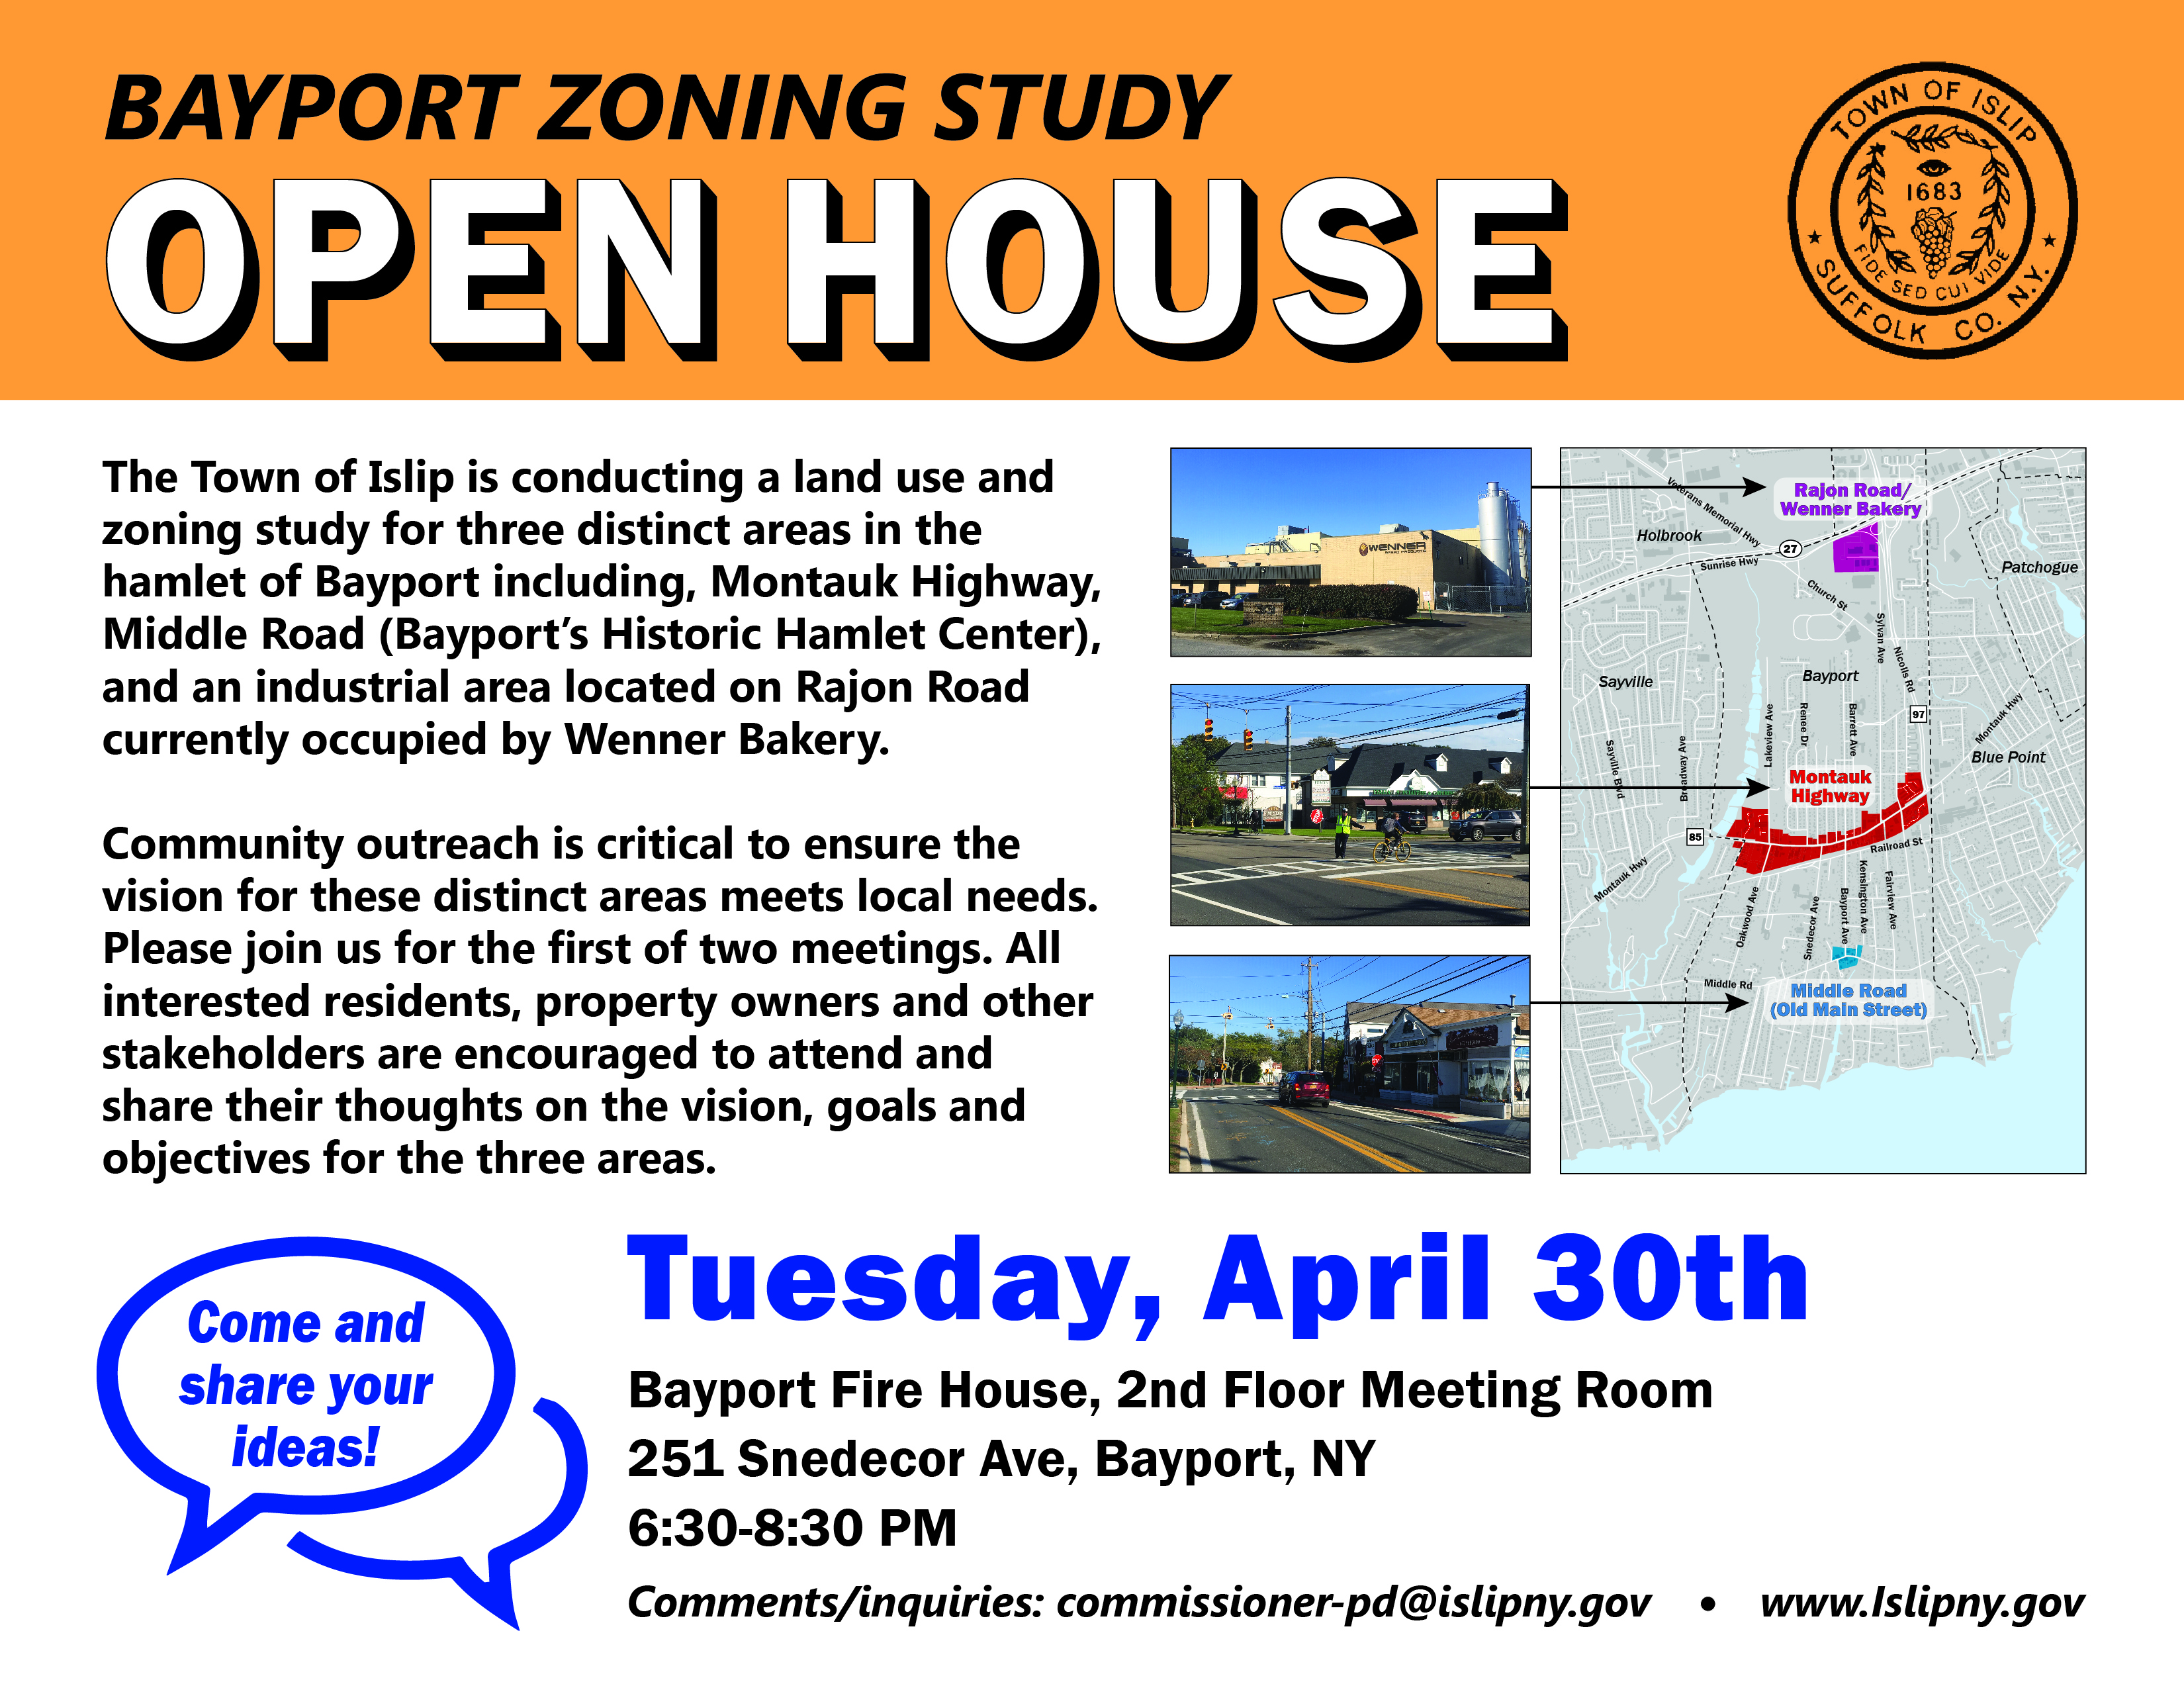 A flyer image announcing the Bayport Zoning Study Open House to be held Tuesday, April 30th at the Bayport Fire House 2nd Floor Meeting Room located at 251 Sendecor Avenue in Bayport NY, fom 6:30pm-8:30 pm